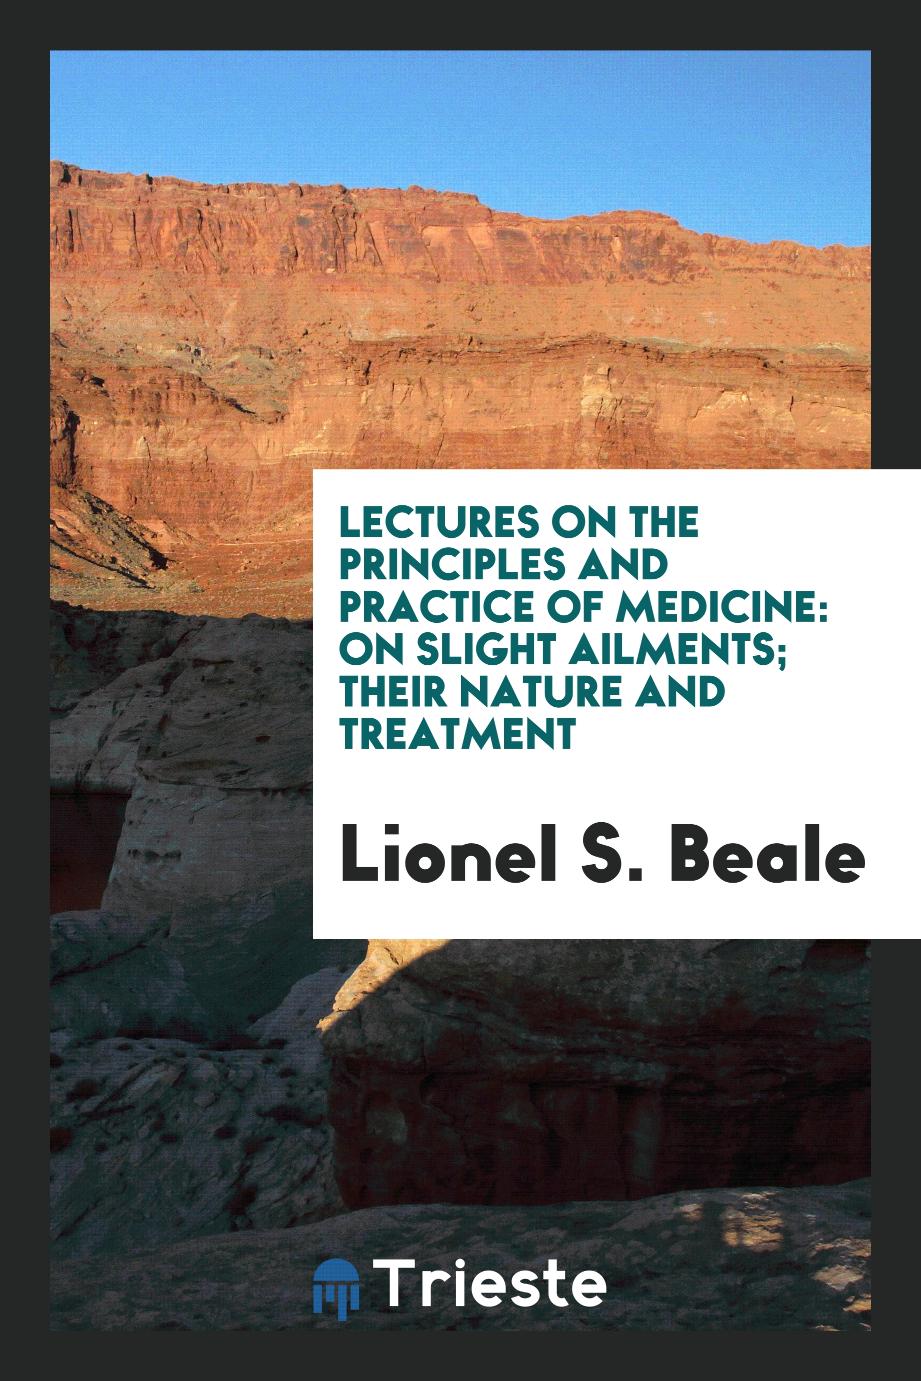 Lectures on the Principles and Practice of Medicine: On Slight Ailments; Their Nature and Treatment